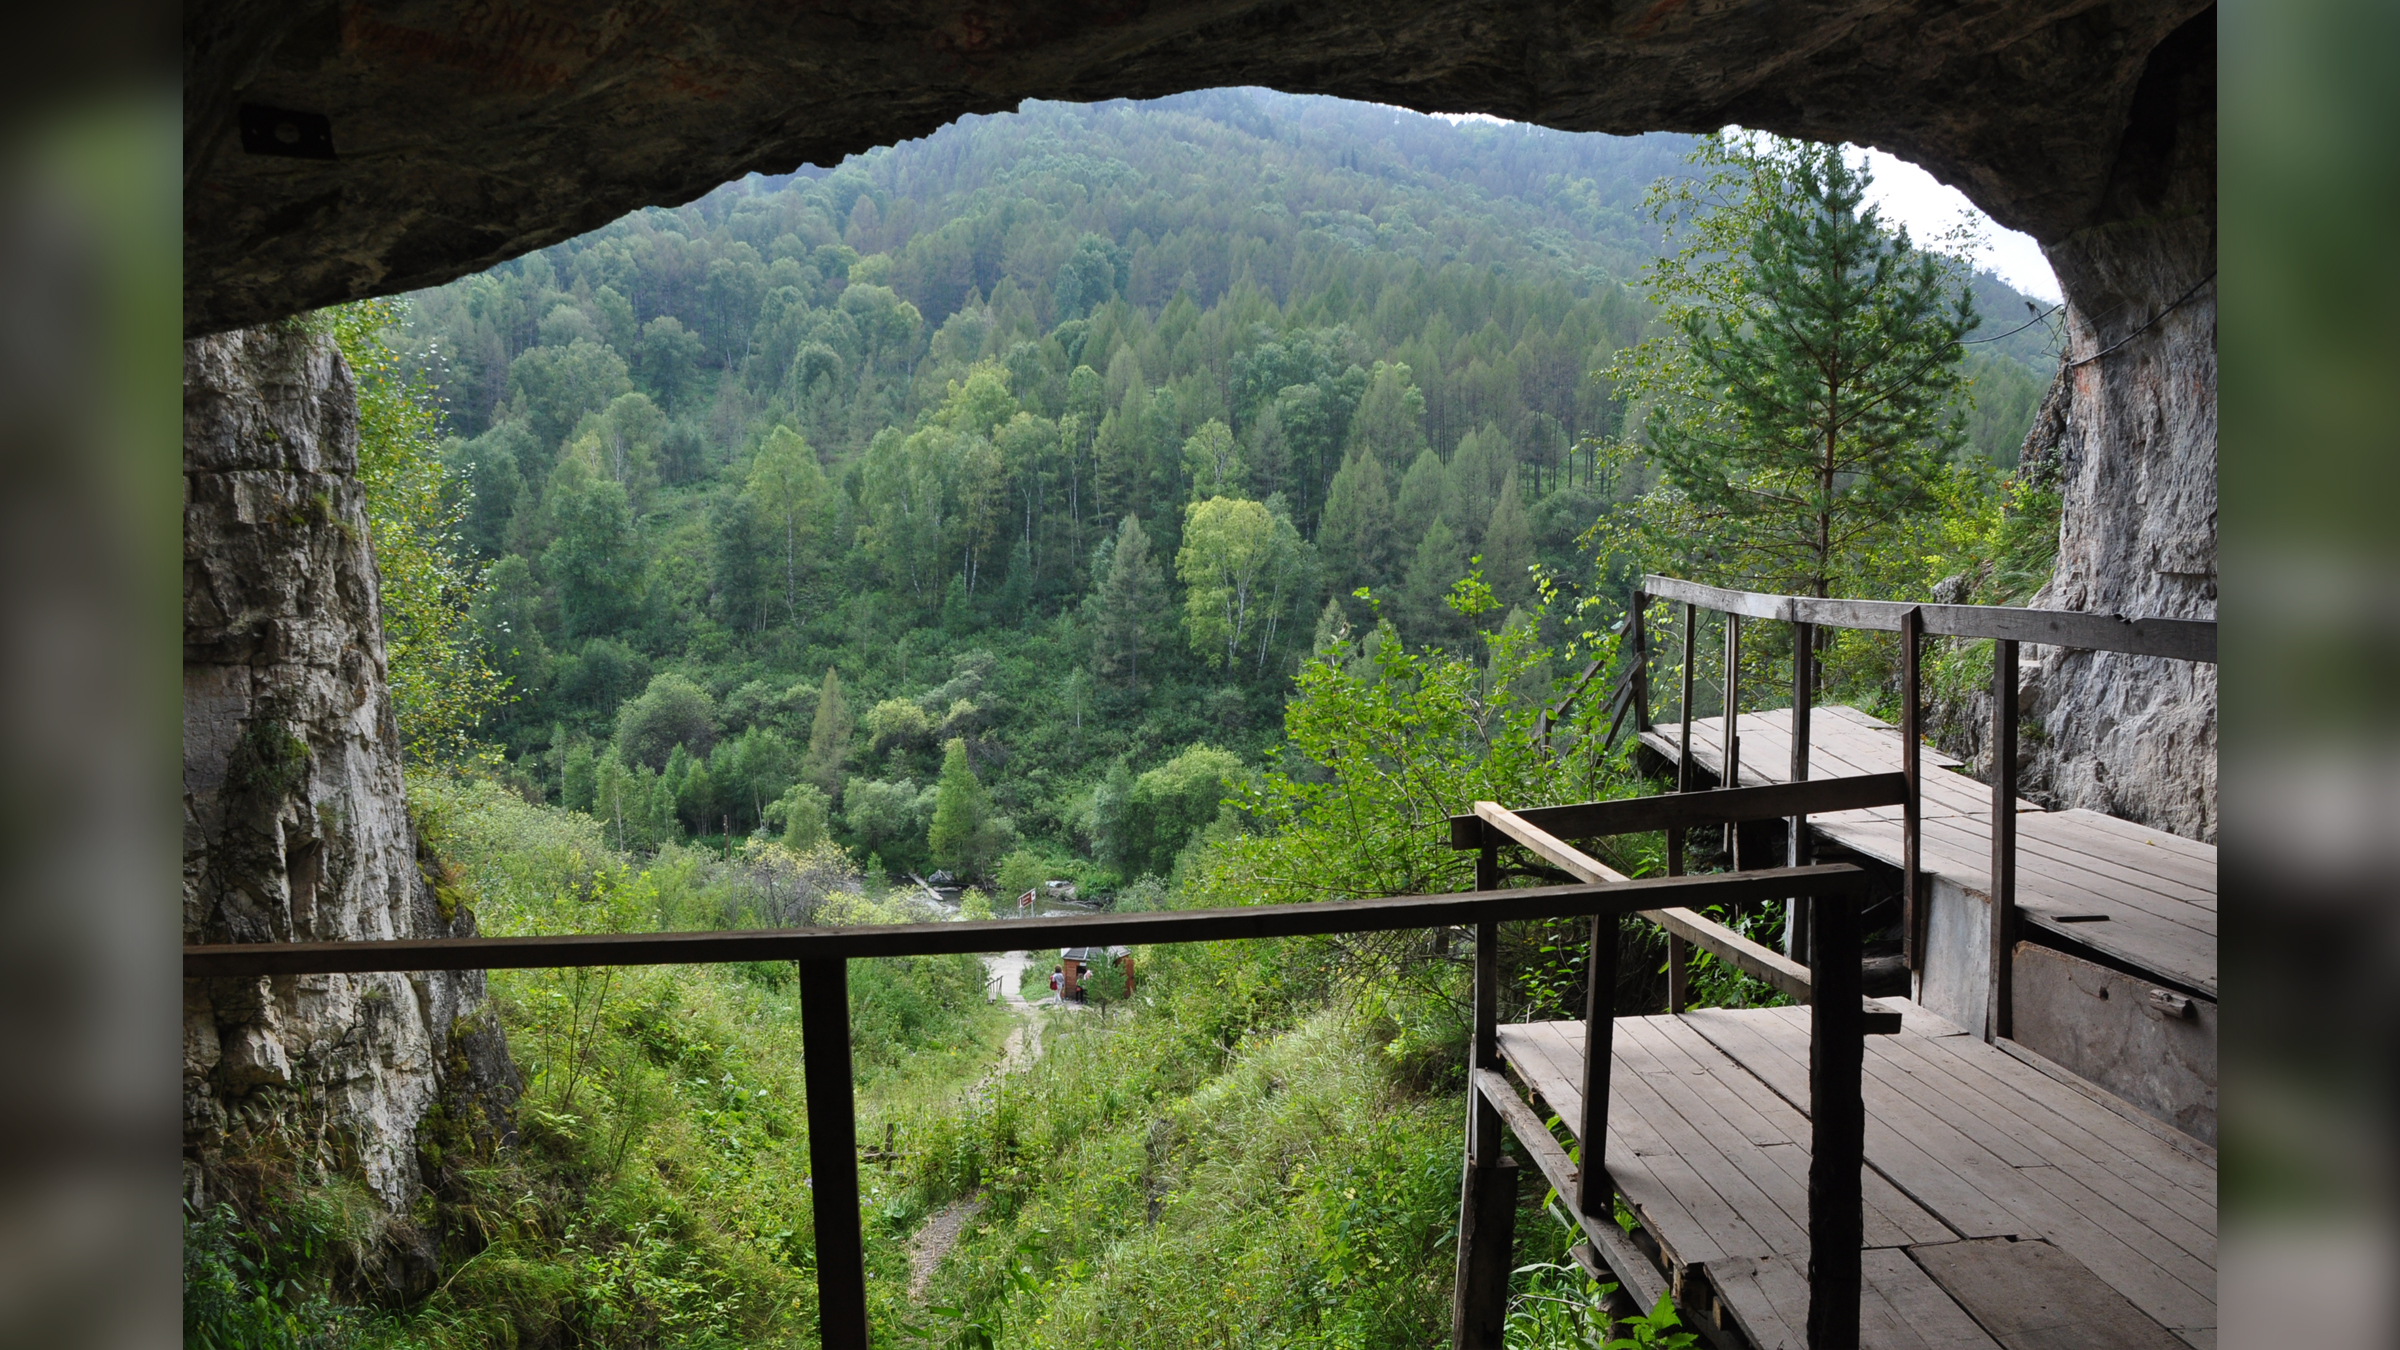 View from inside the Denis Cave in the Russian Altai Mountains.  Notice how the vegetation and climate are different here compared to Laos.